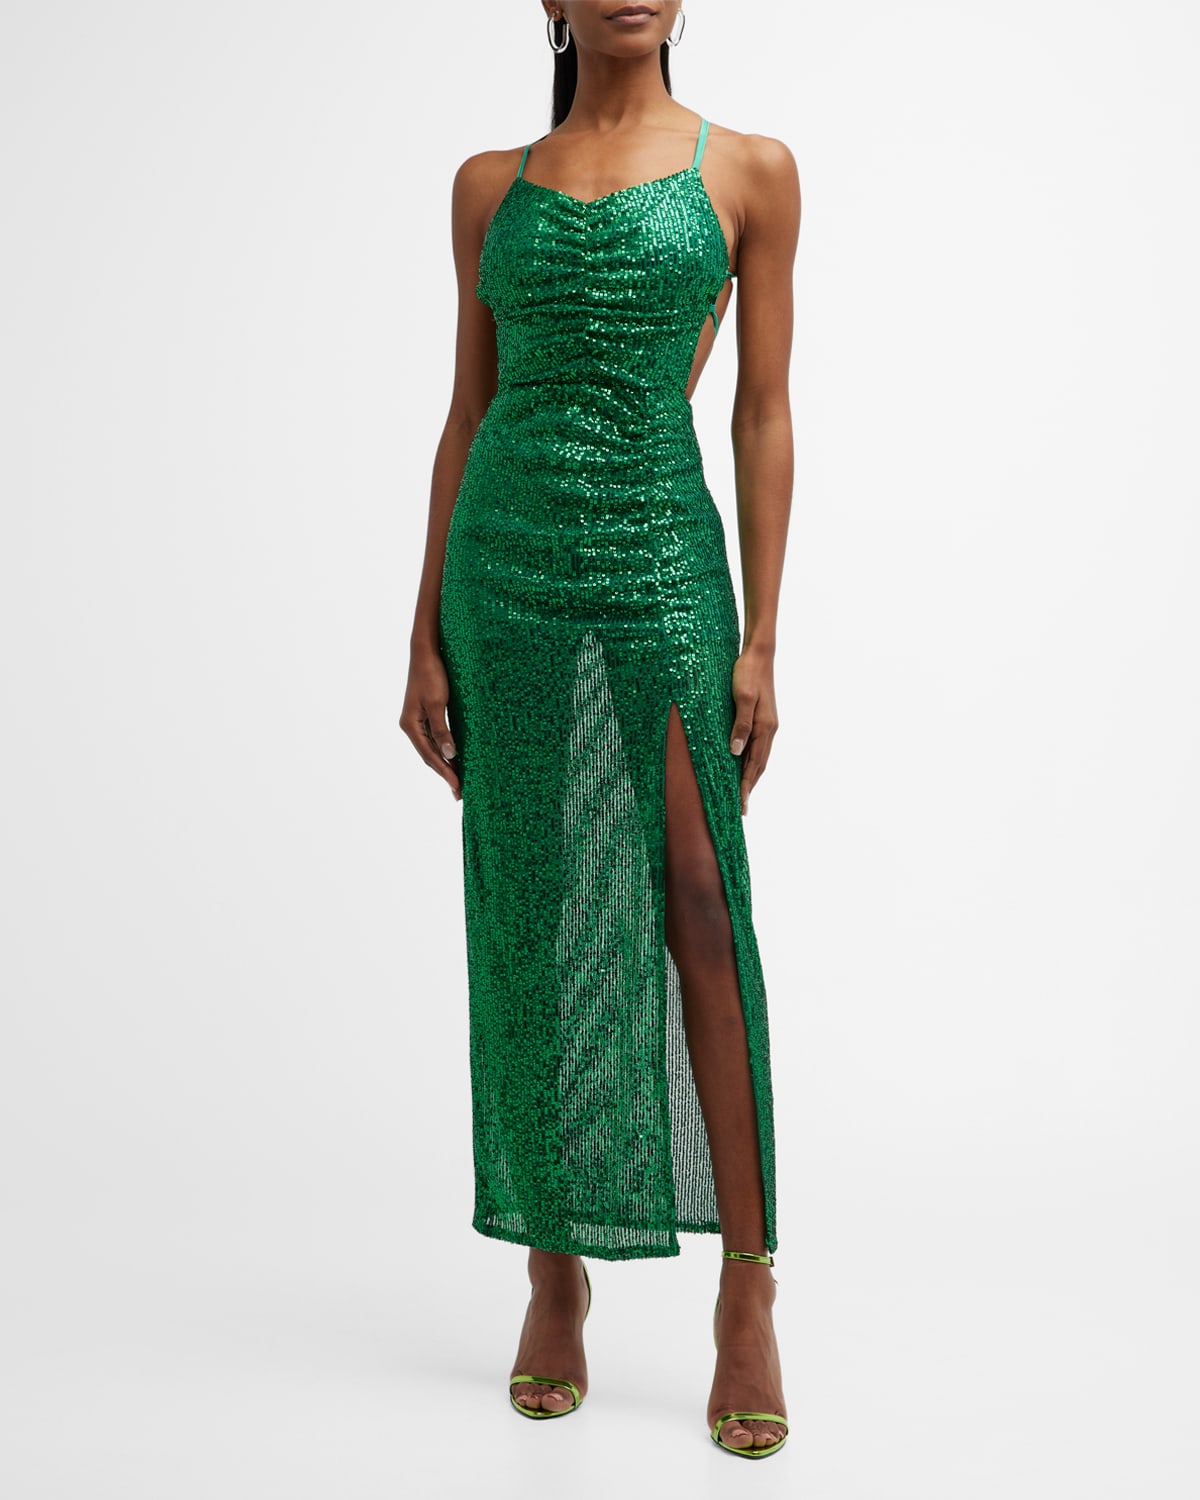 LACE The Label Sequin Ruched Maxi Dress